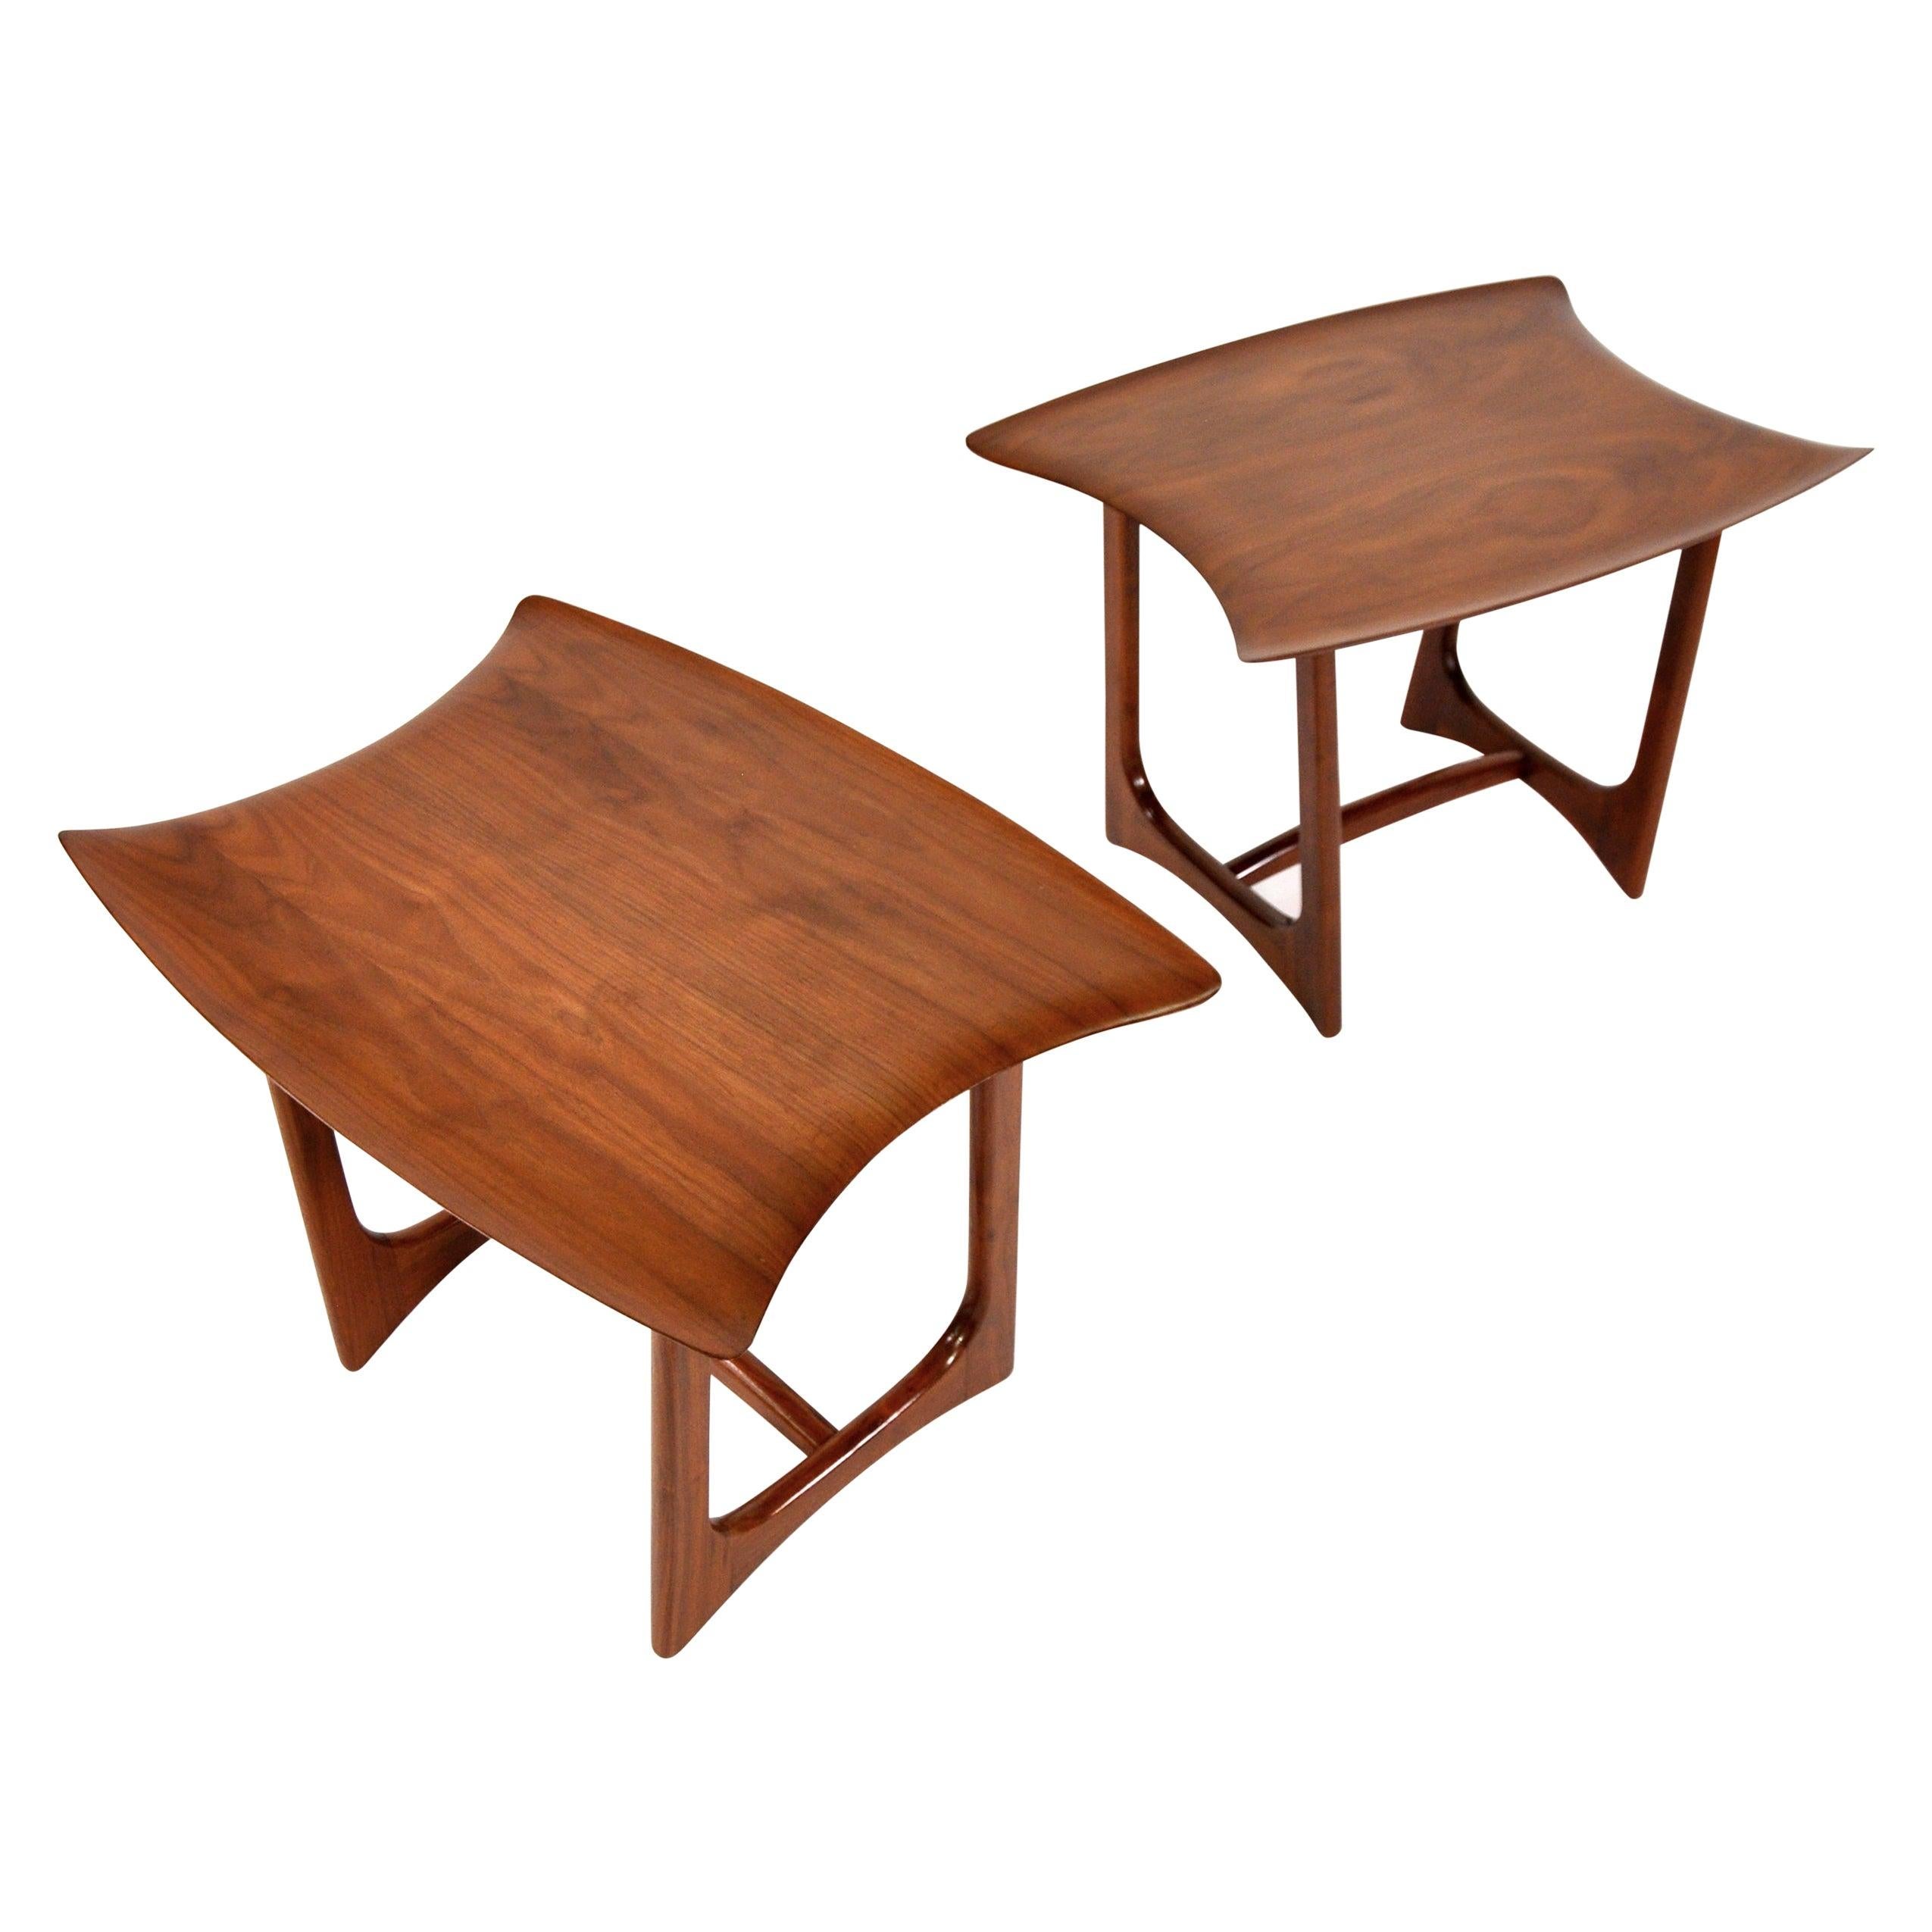 Pair of Adrian Pearsall Walnut Stingray Tables by Craft Associates